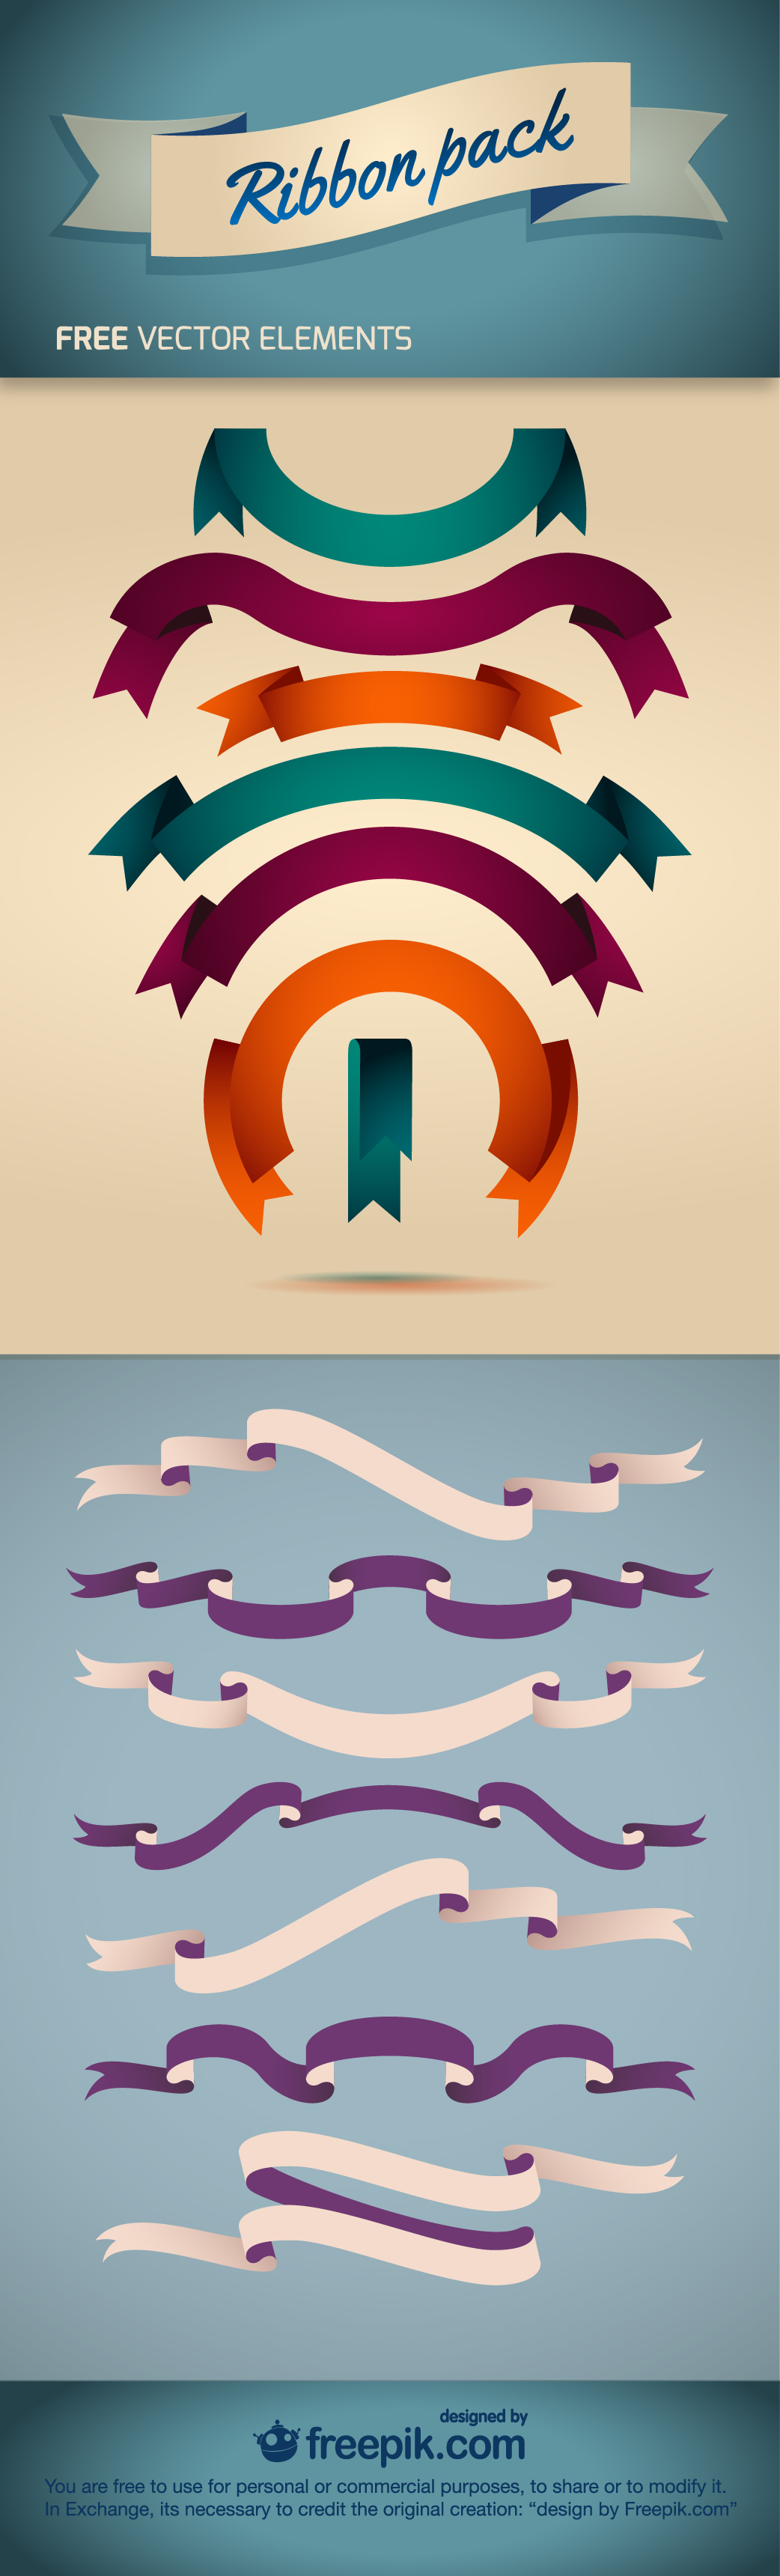 Ribbon Pack - Free Vector Element